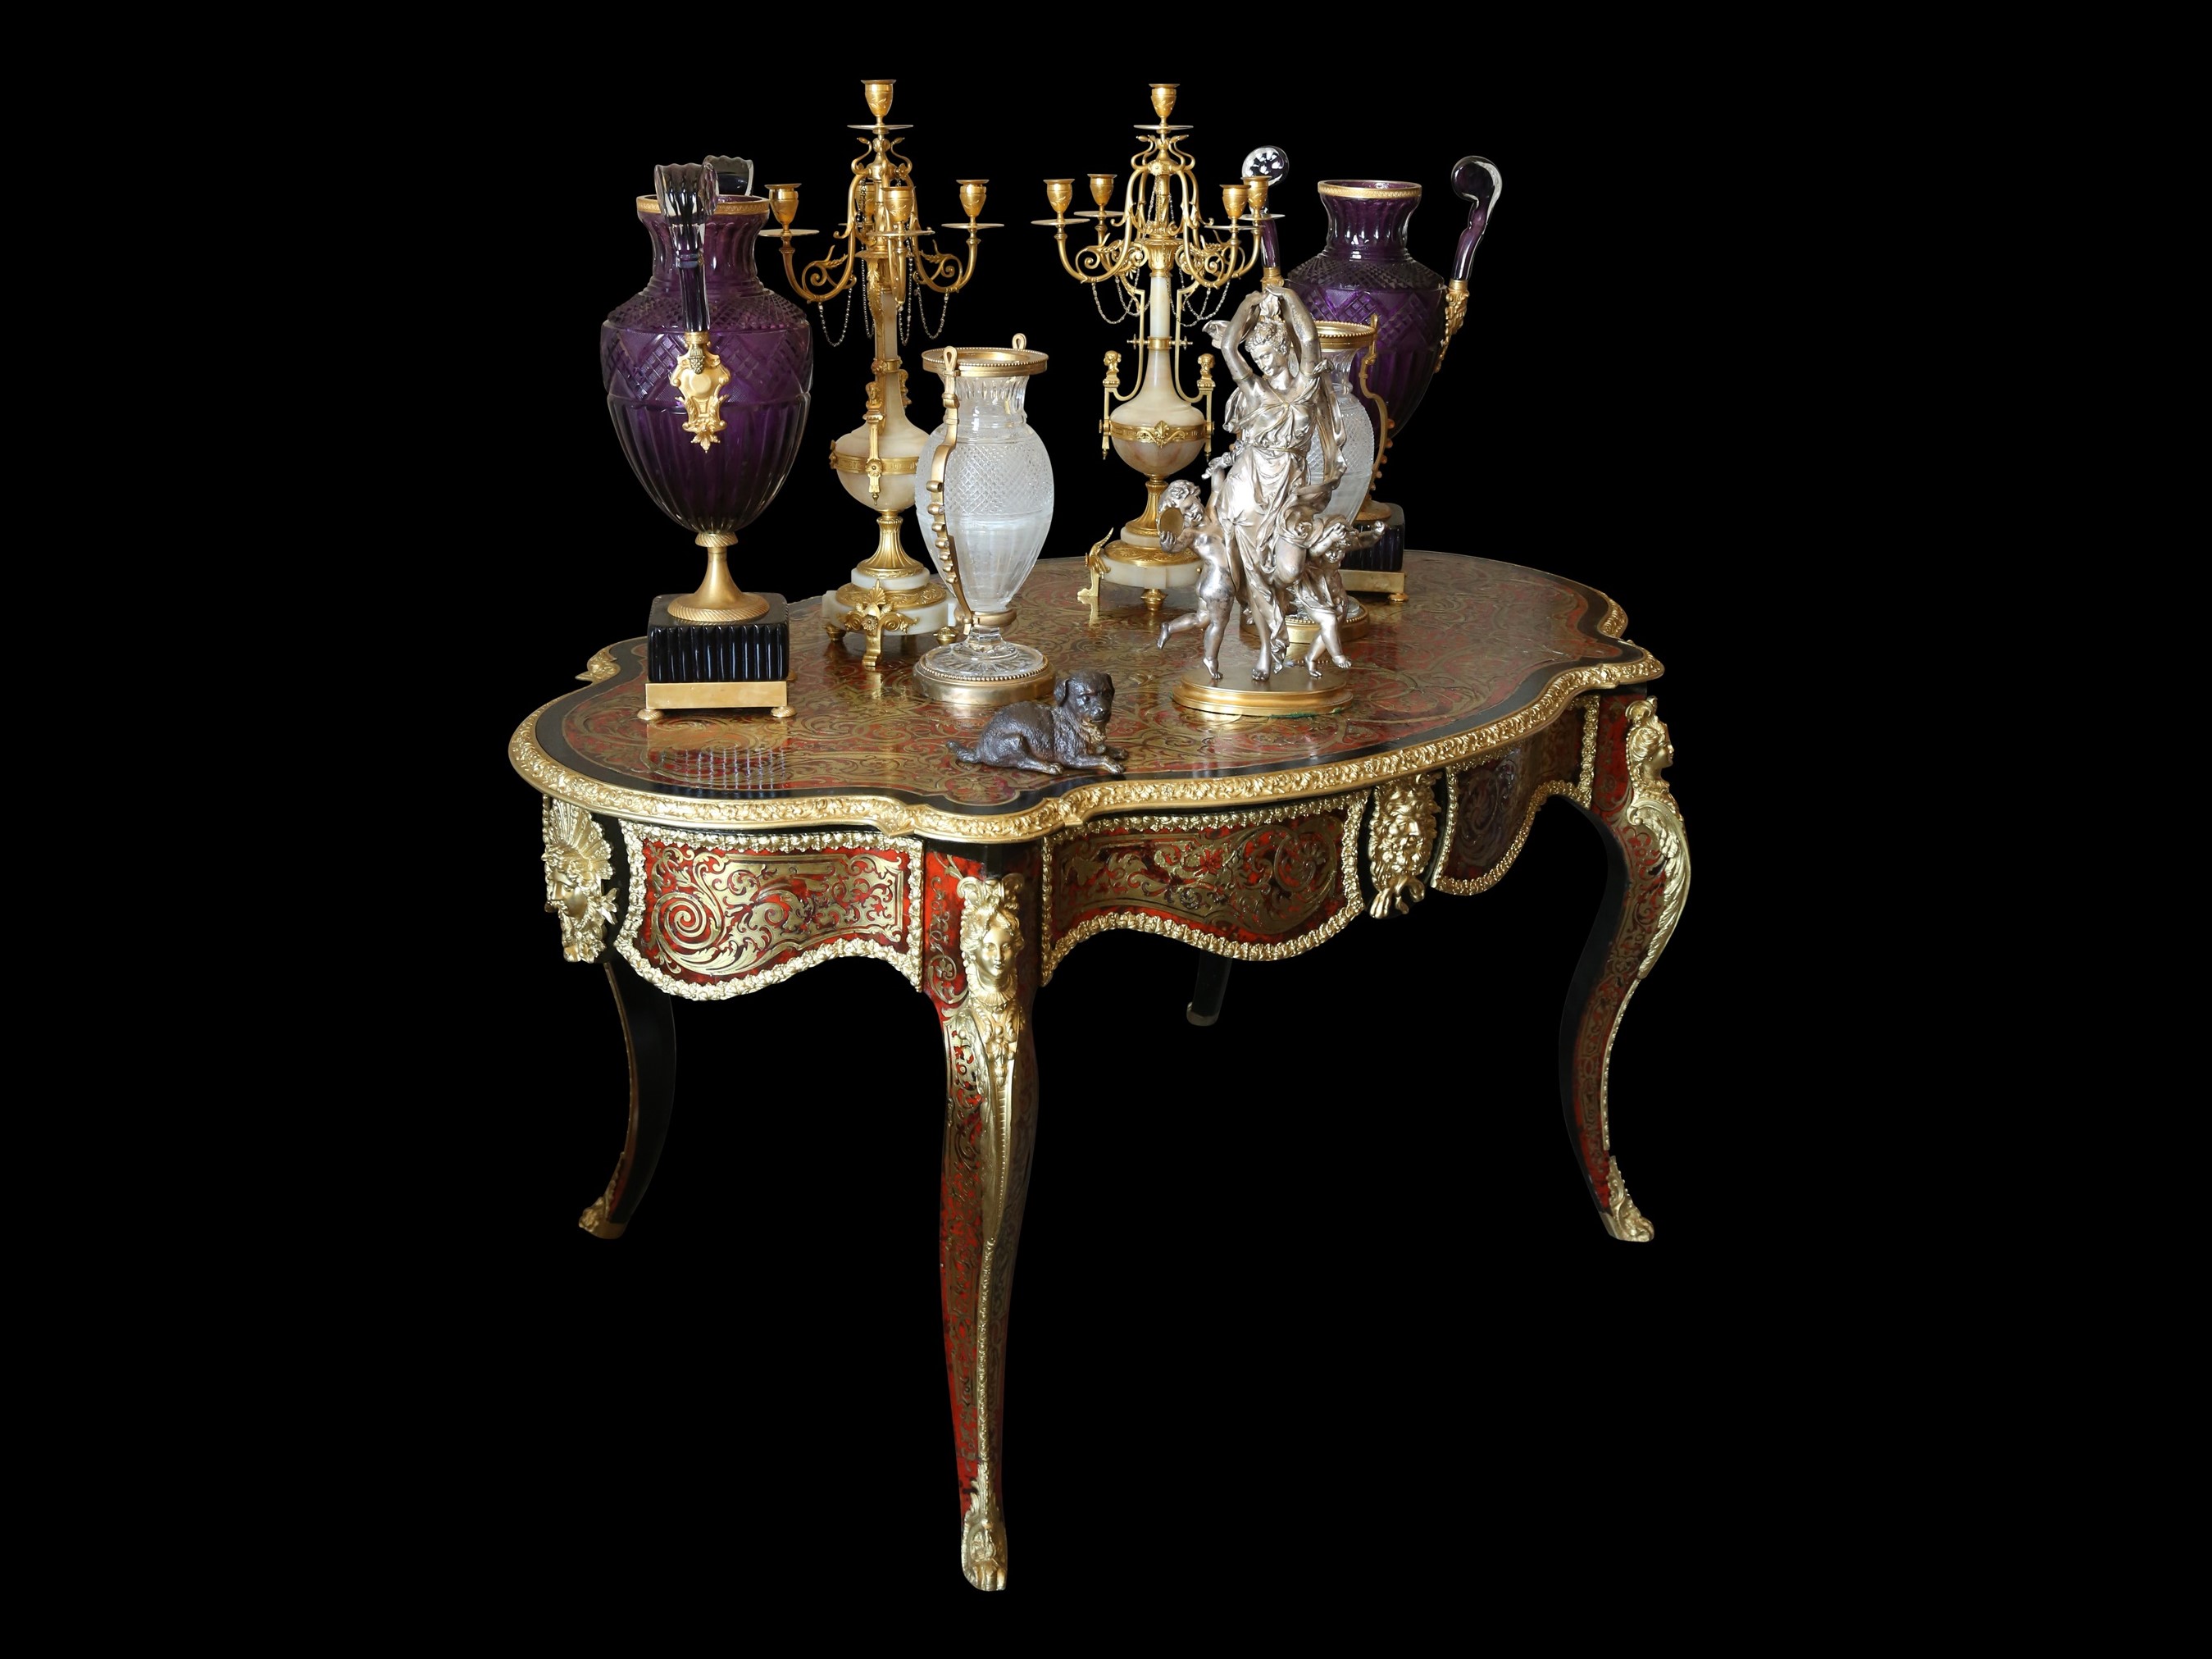 A FINE 19TH CENTURY FRENCH CUT BRASS AND TORTOISESHELL INLAID BOULLE STYLE TABLE